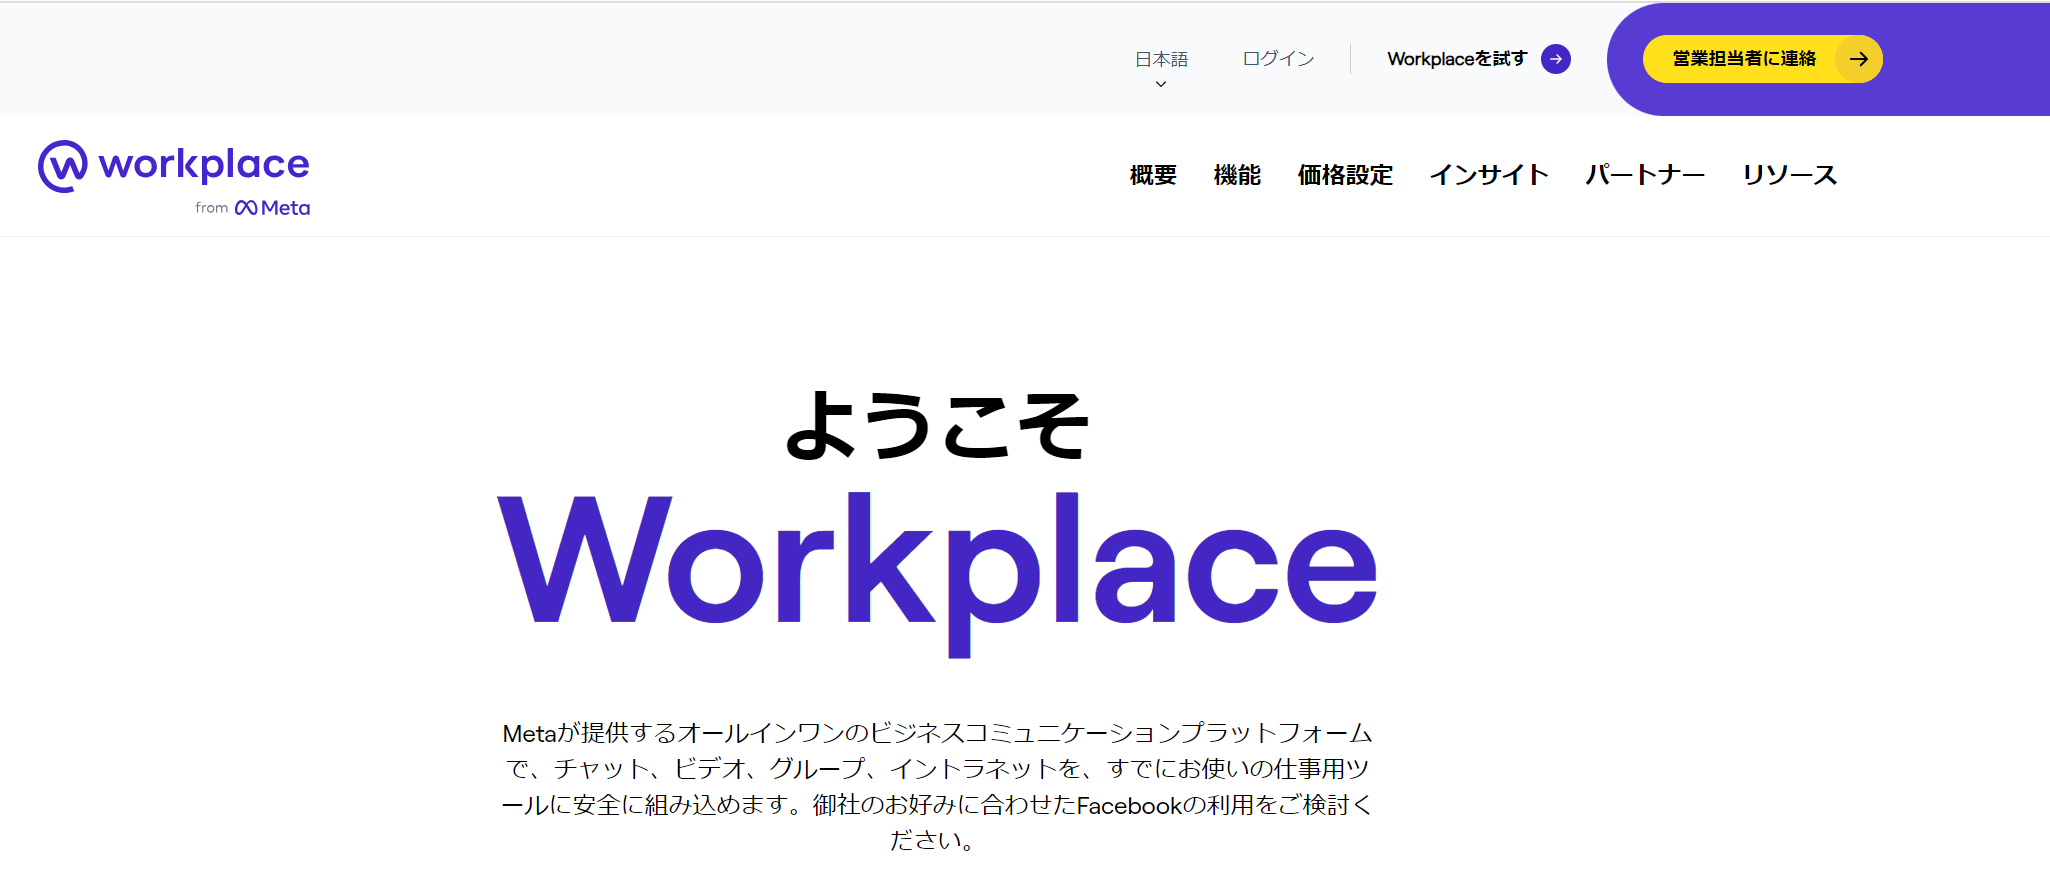 Workplace from Metaのトップページ